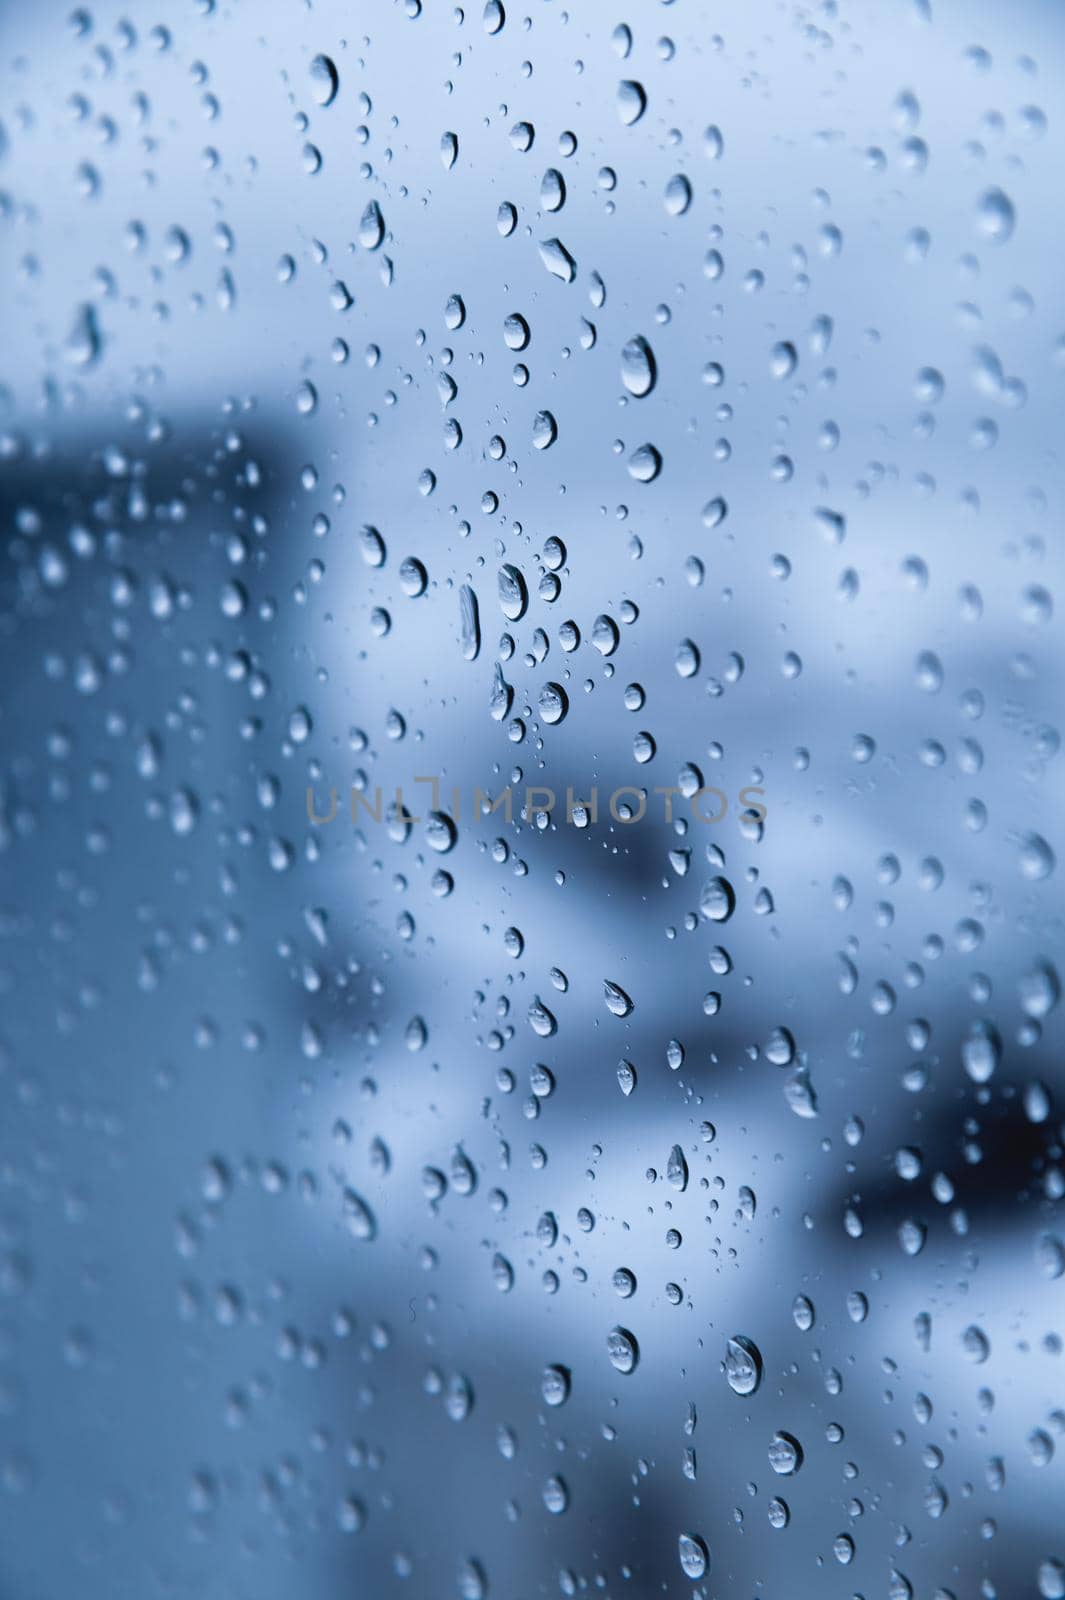 Drops of rain on blue glass with defocused streets. Urban abstract background by yanik88